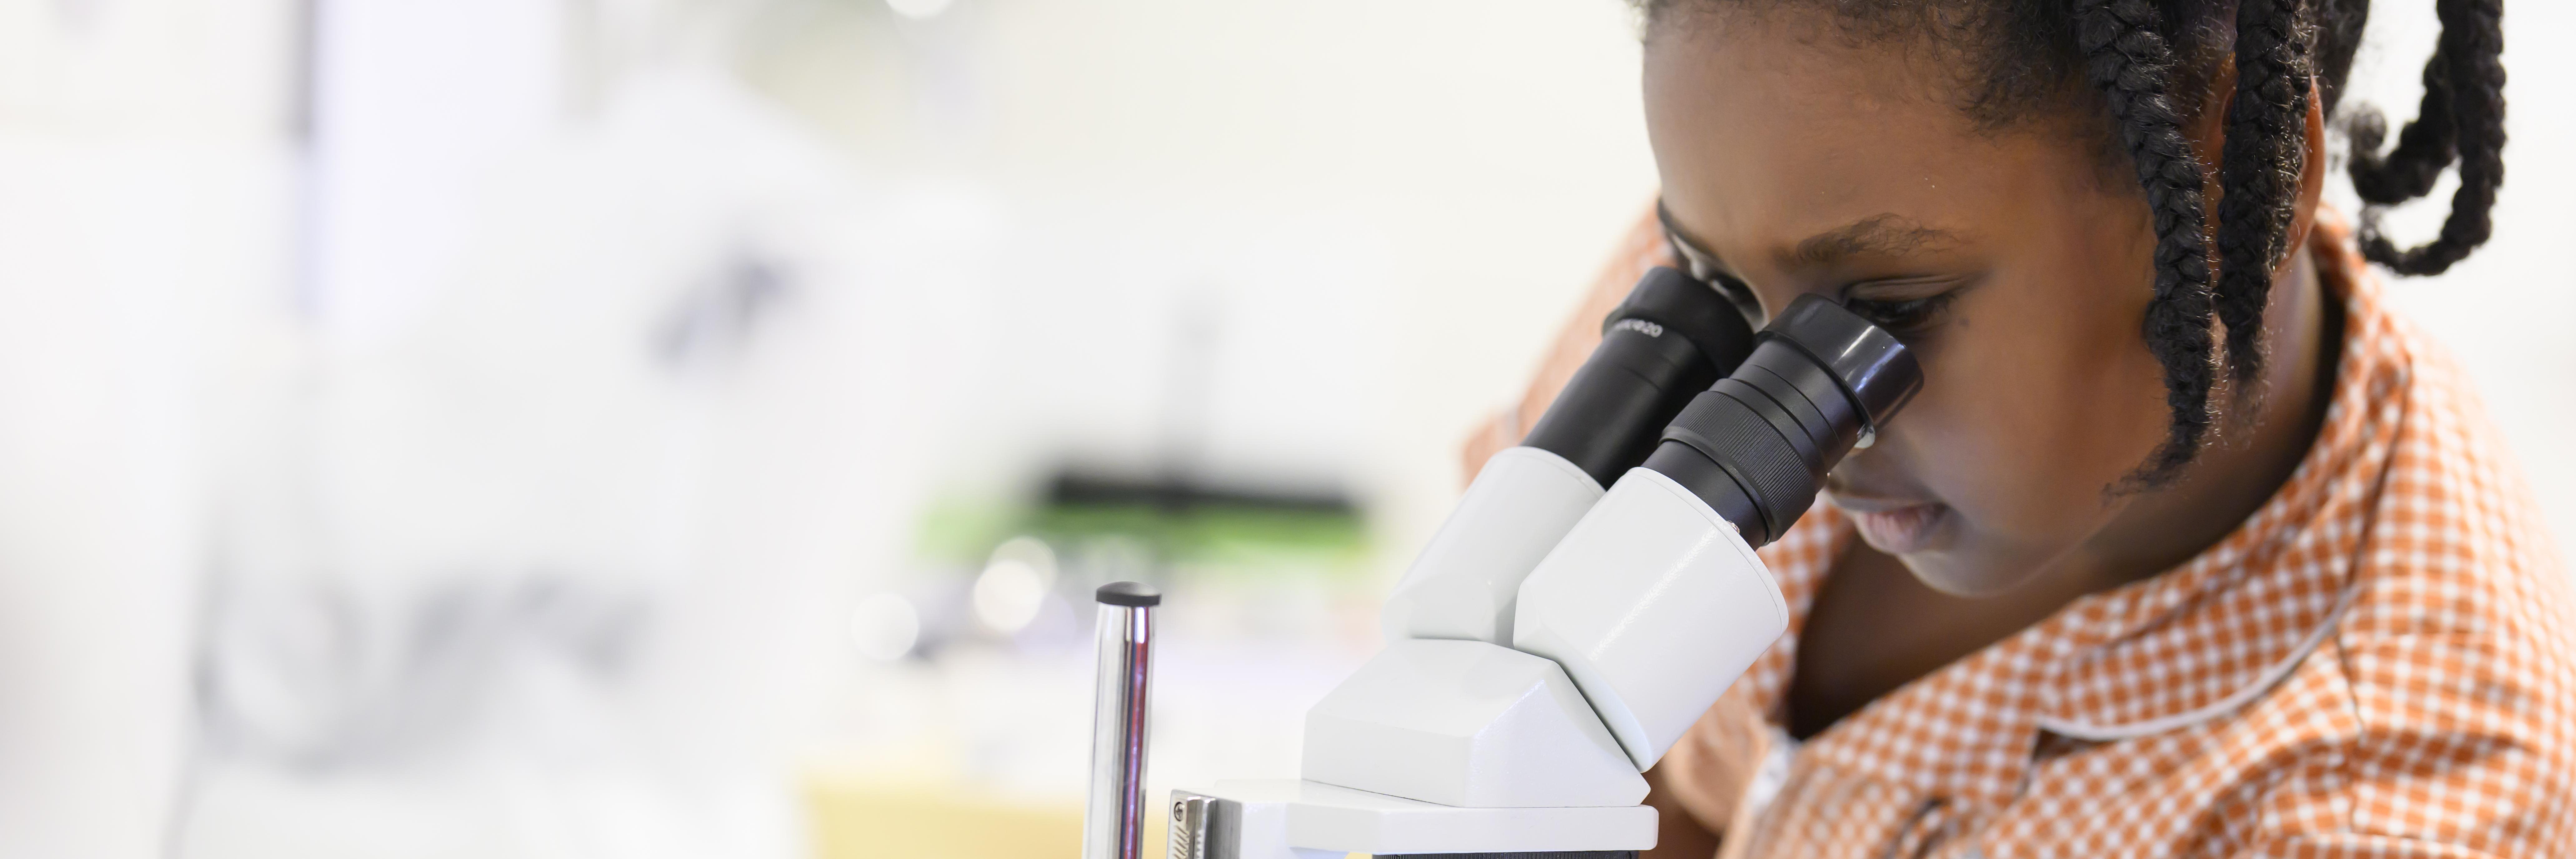 girl on right hand side of image looking into a white microscope with black eyepieces to her left. 